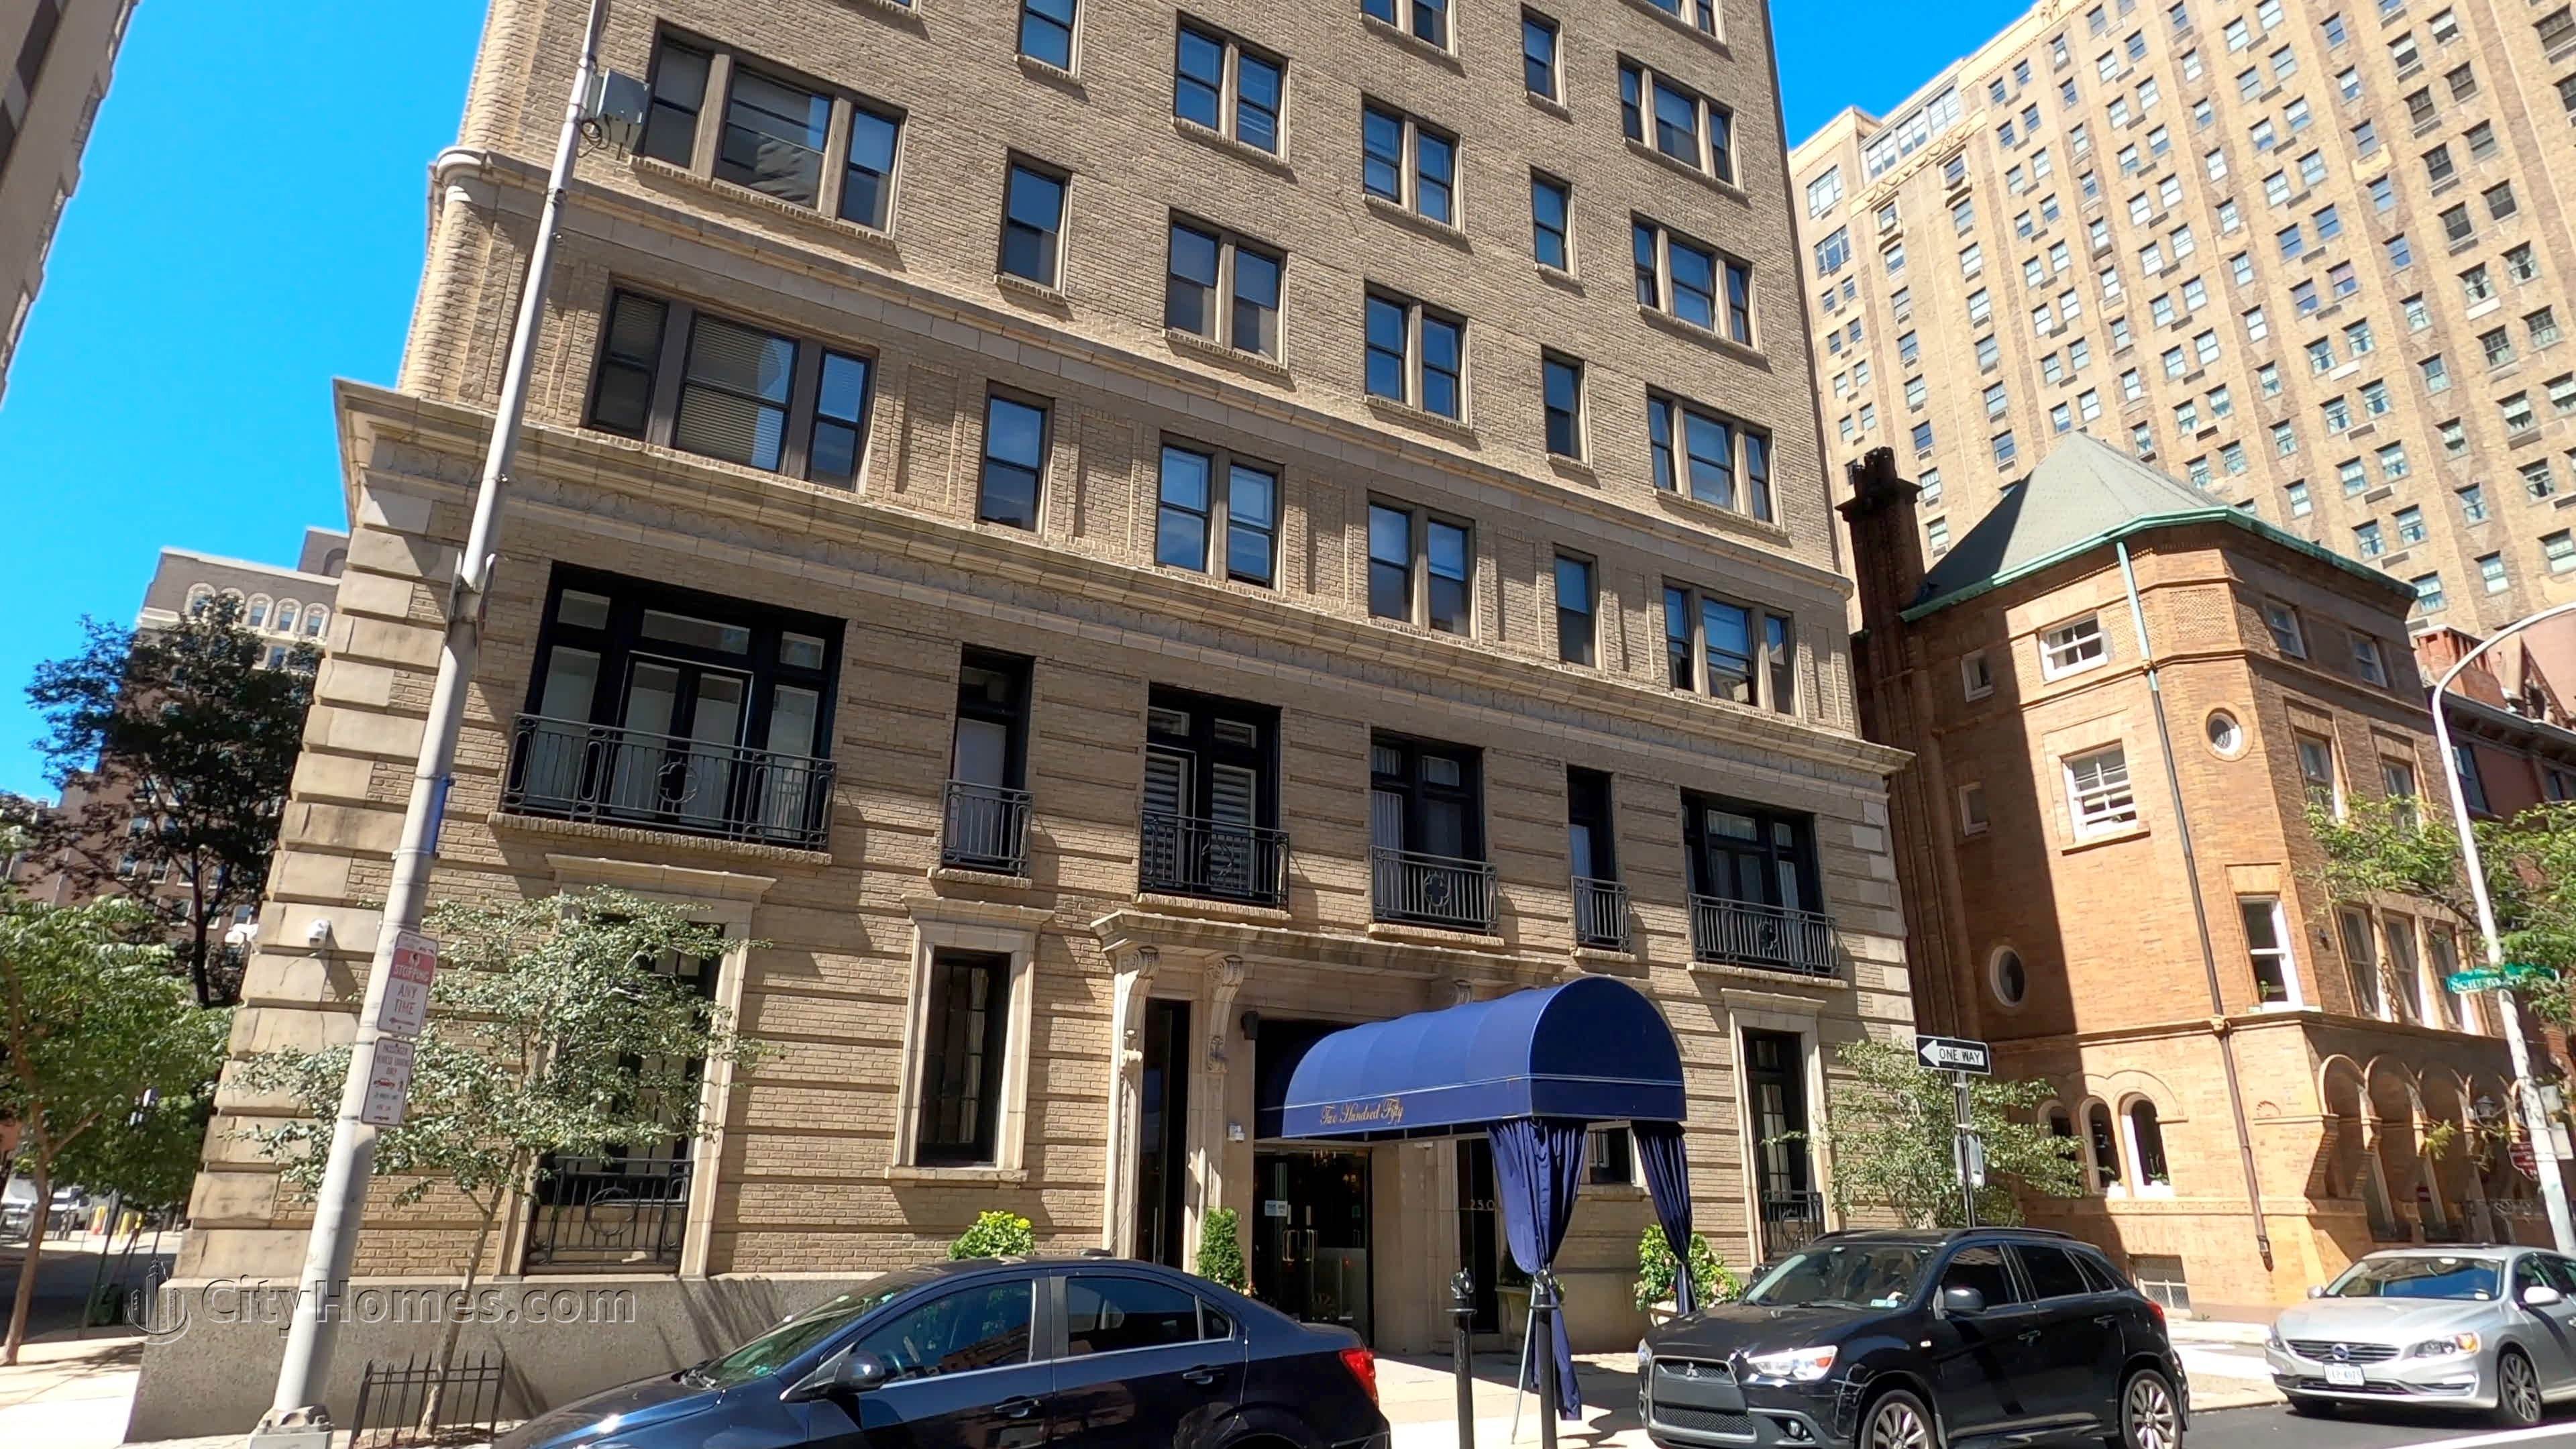 250 South 17th building at 250 S 17th St, Rittenhouse Square, Philadelphia, PA 19103